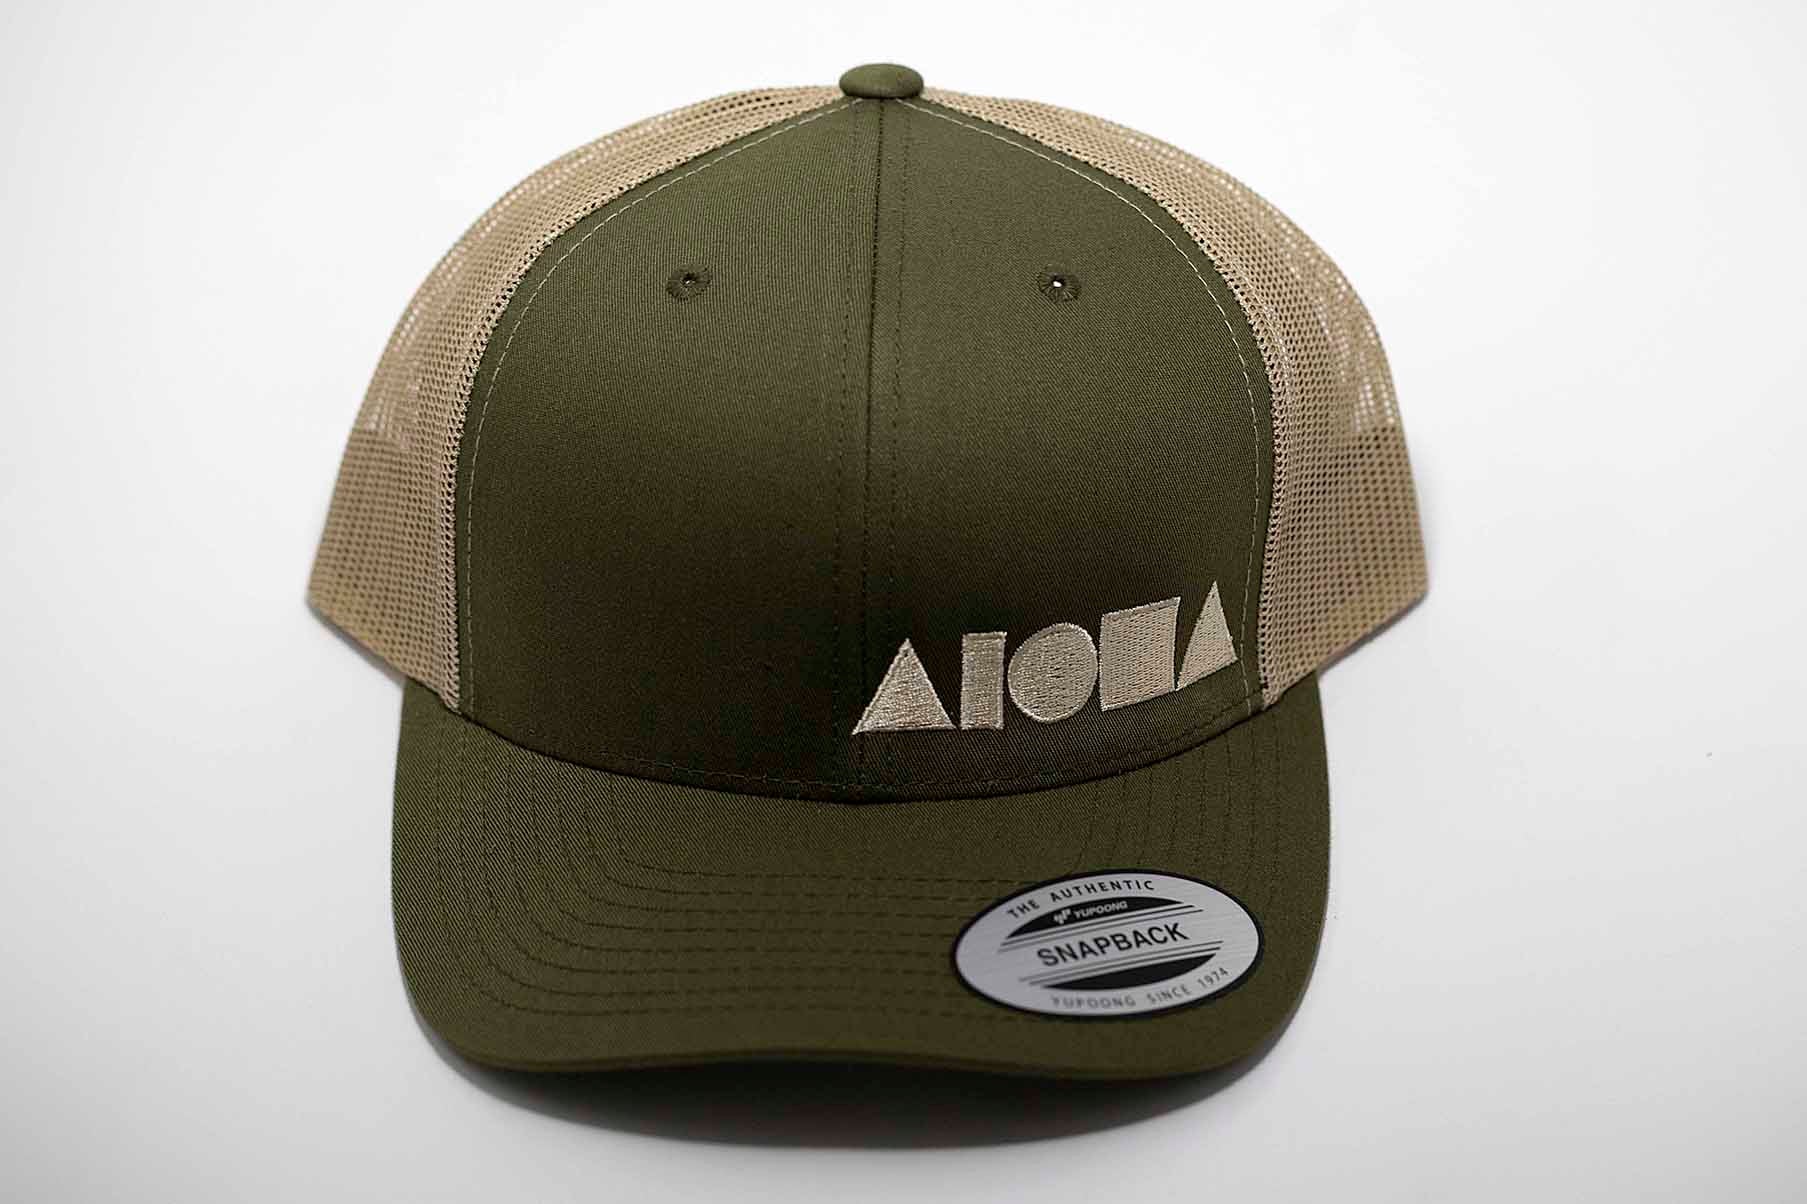 Adult curved bill snapback hat. Military green brim and front panels. Khaki color mesh back panels. Tan color embroidered Aloha Shapes® logo.